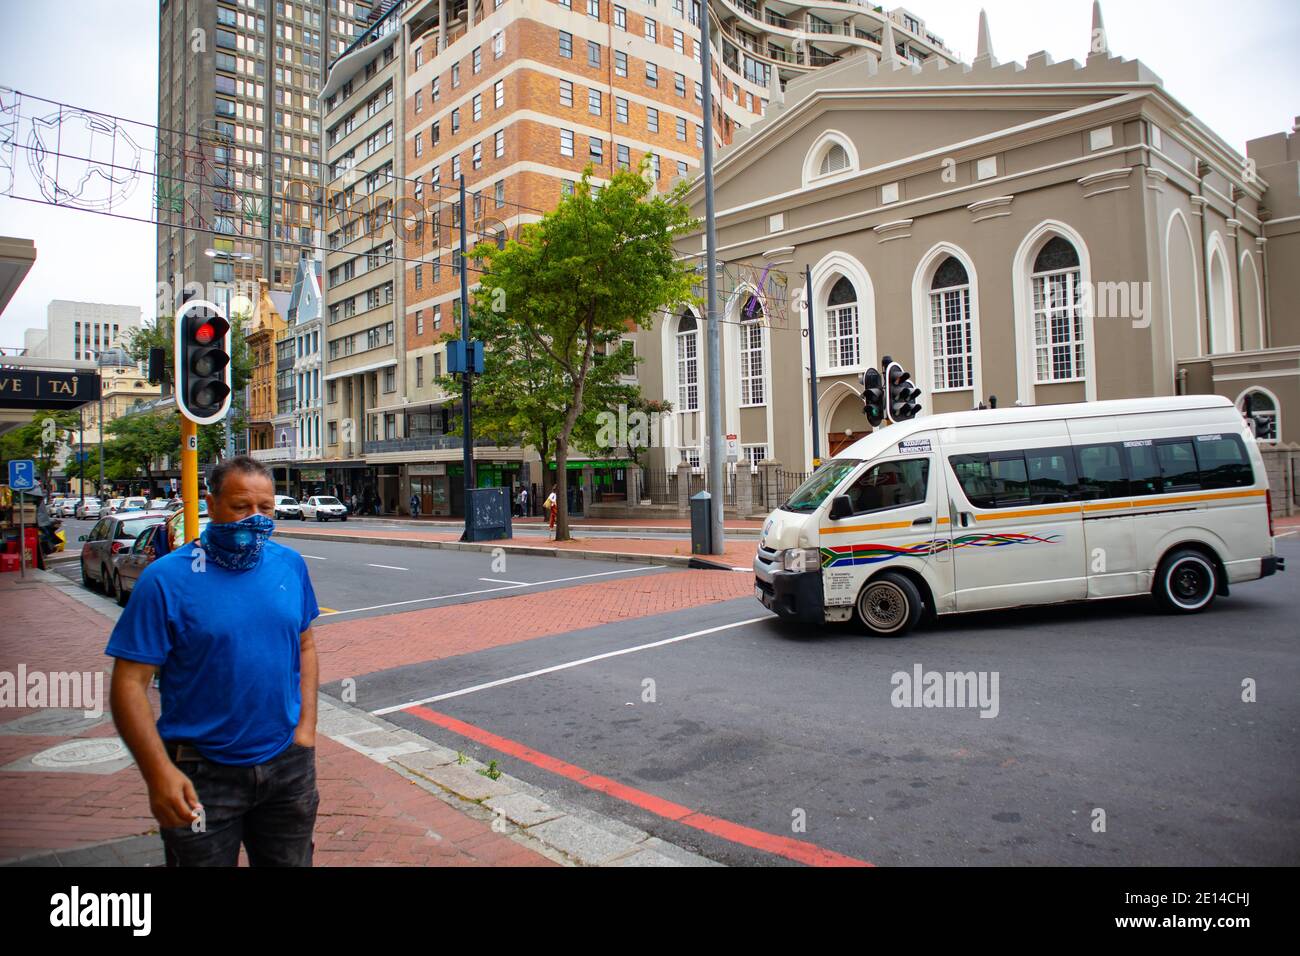 Cape Town, South Africa - 23/11/2020 Cloudy day in Cape Town. Man with wearing blue t-shirt and face-mask walking by. Taxi in background. Stock Photo